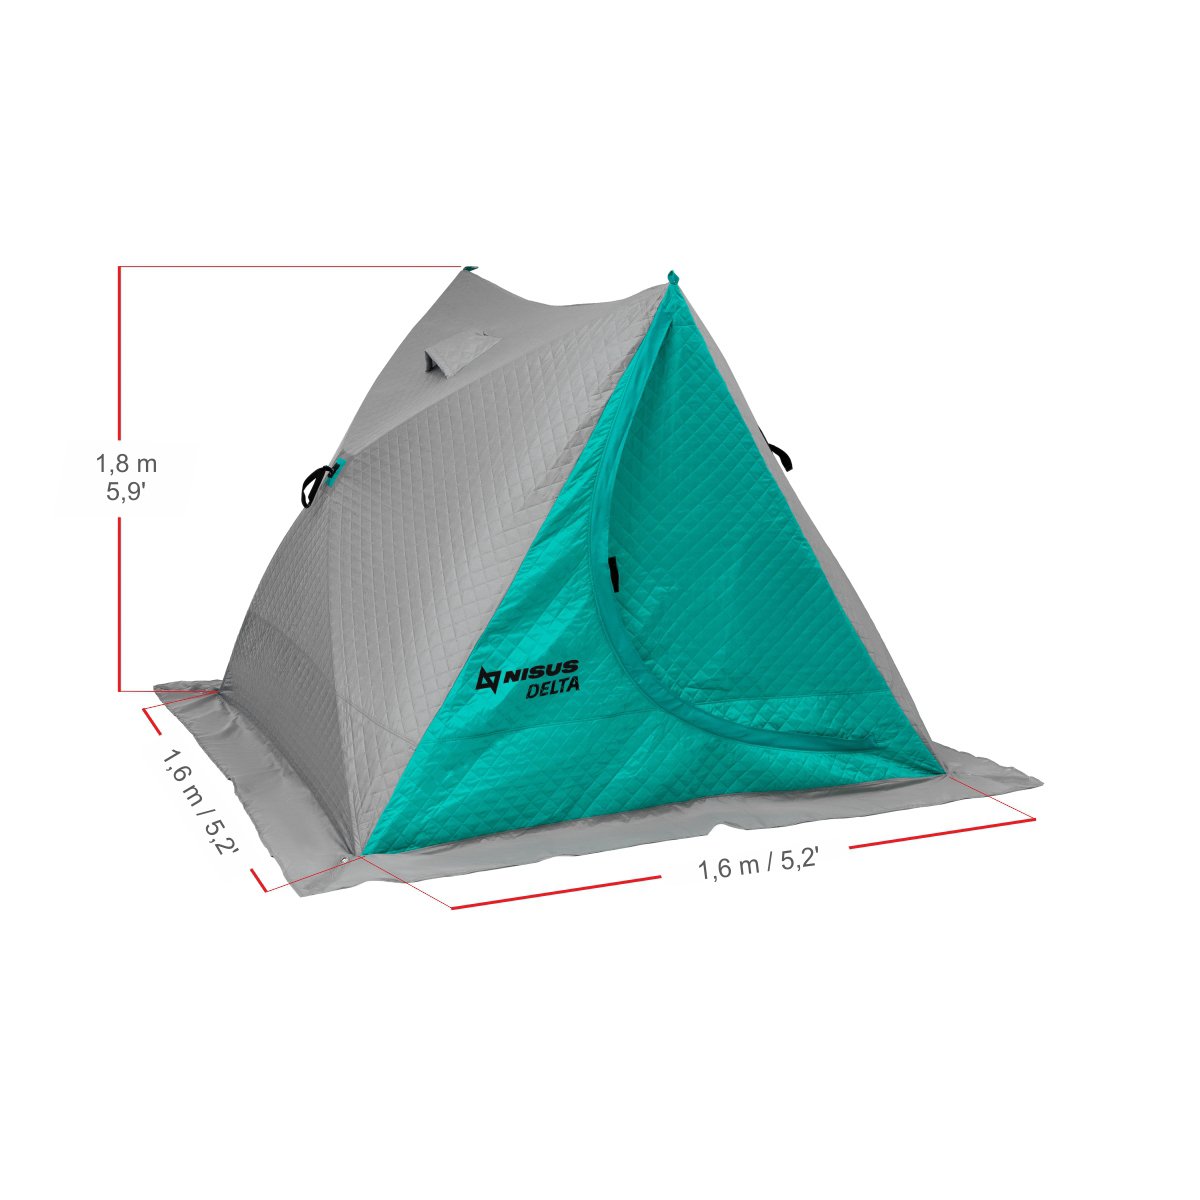 Delta Portable Insulated Ice Fishing Tent Shelter for 2 Persons is 5.9 feet high, 5.2 feet long and 5.2 feet wide